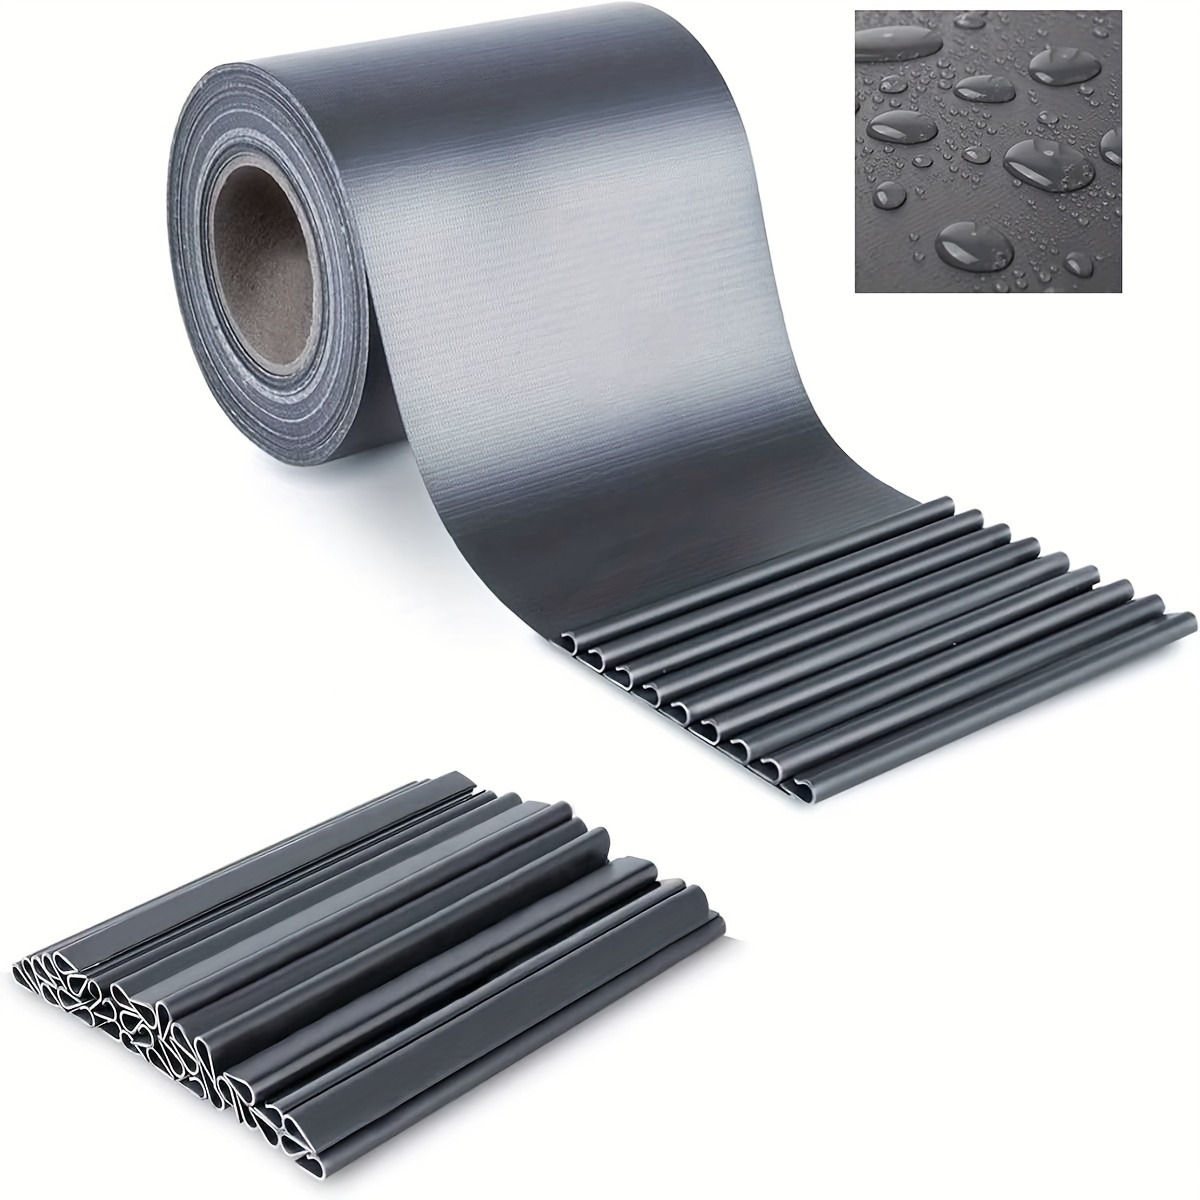 

Pvc Privacy Strips, Privacy Screen For Fence, Privacy Screen For Double Rod Mats, 50mx19cm, Including 35 Fastening Clips, Fence Privacy Screen, Opaque, Wind Protection, Anti-uv, 450g/m², Dark Grey